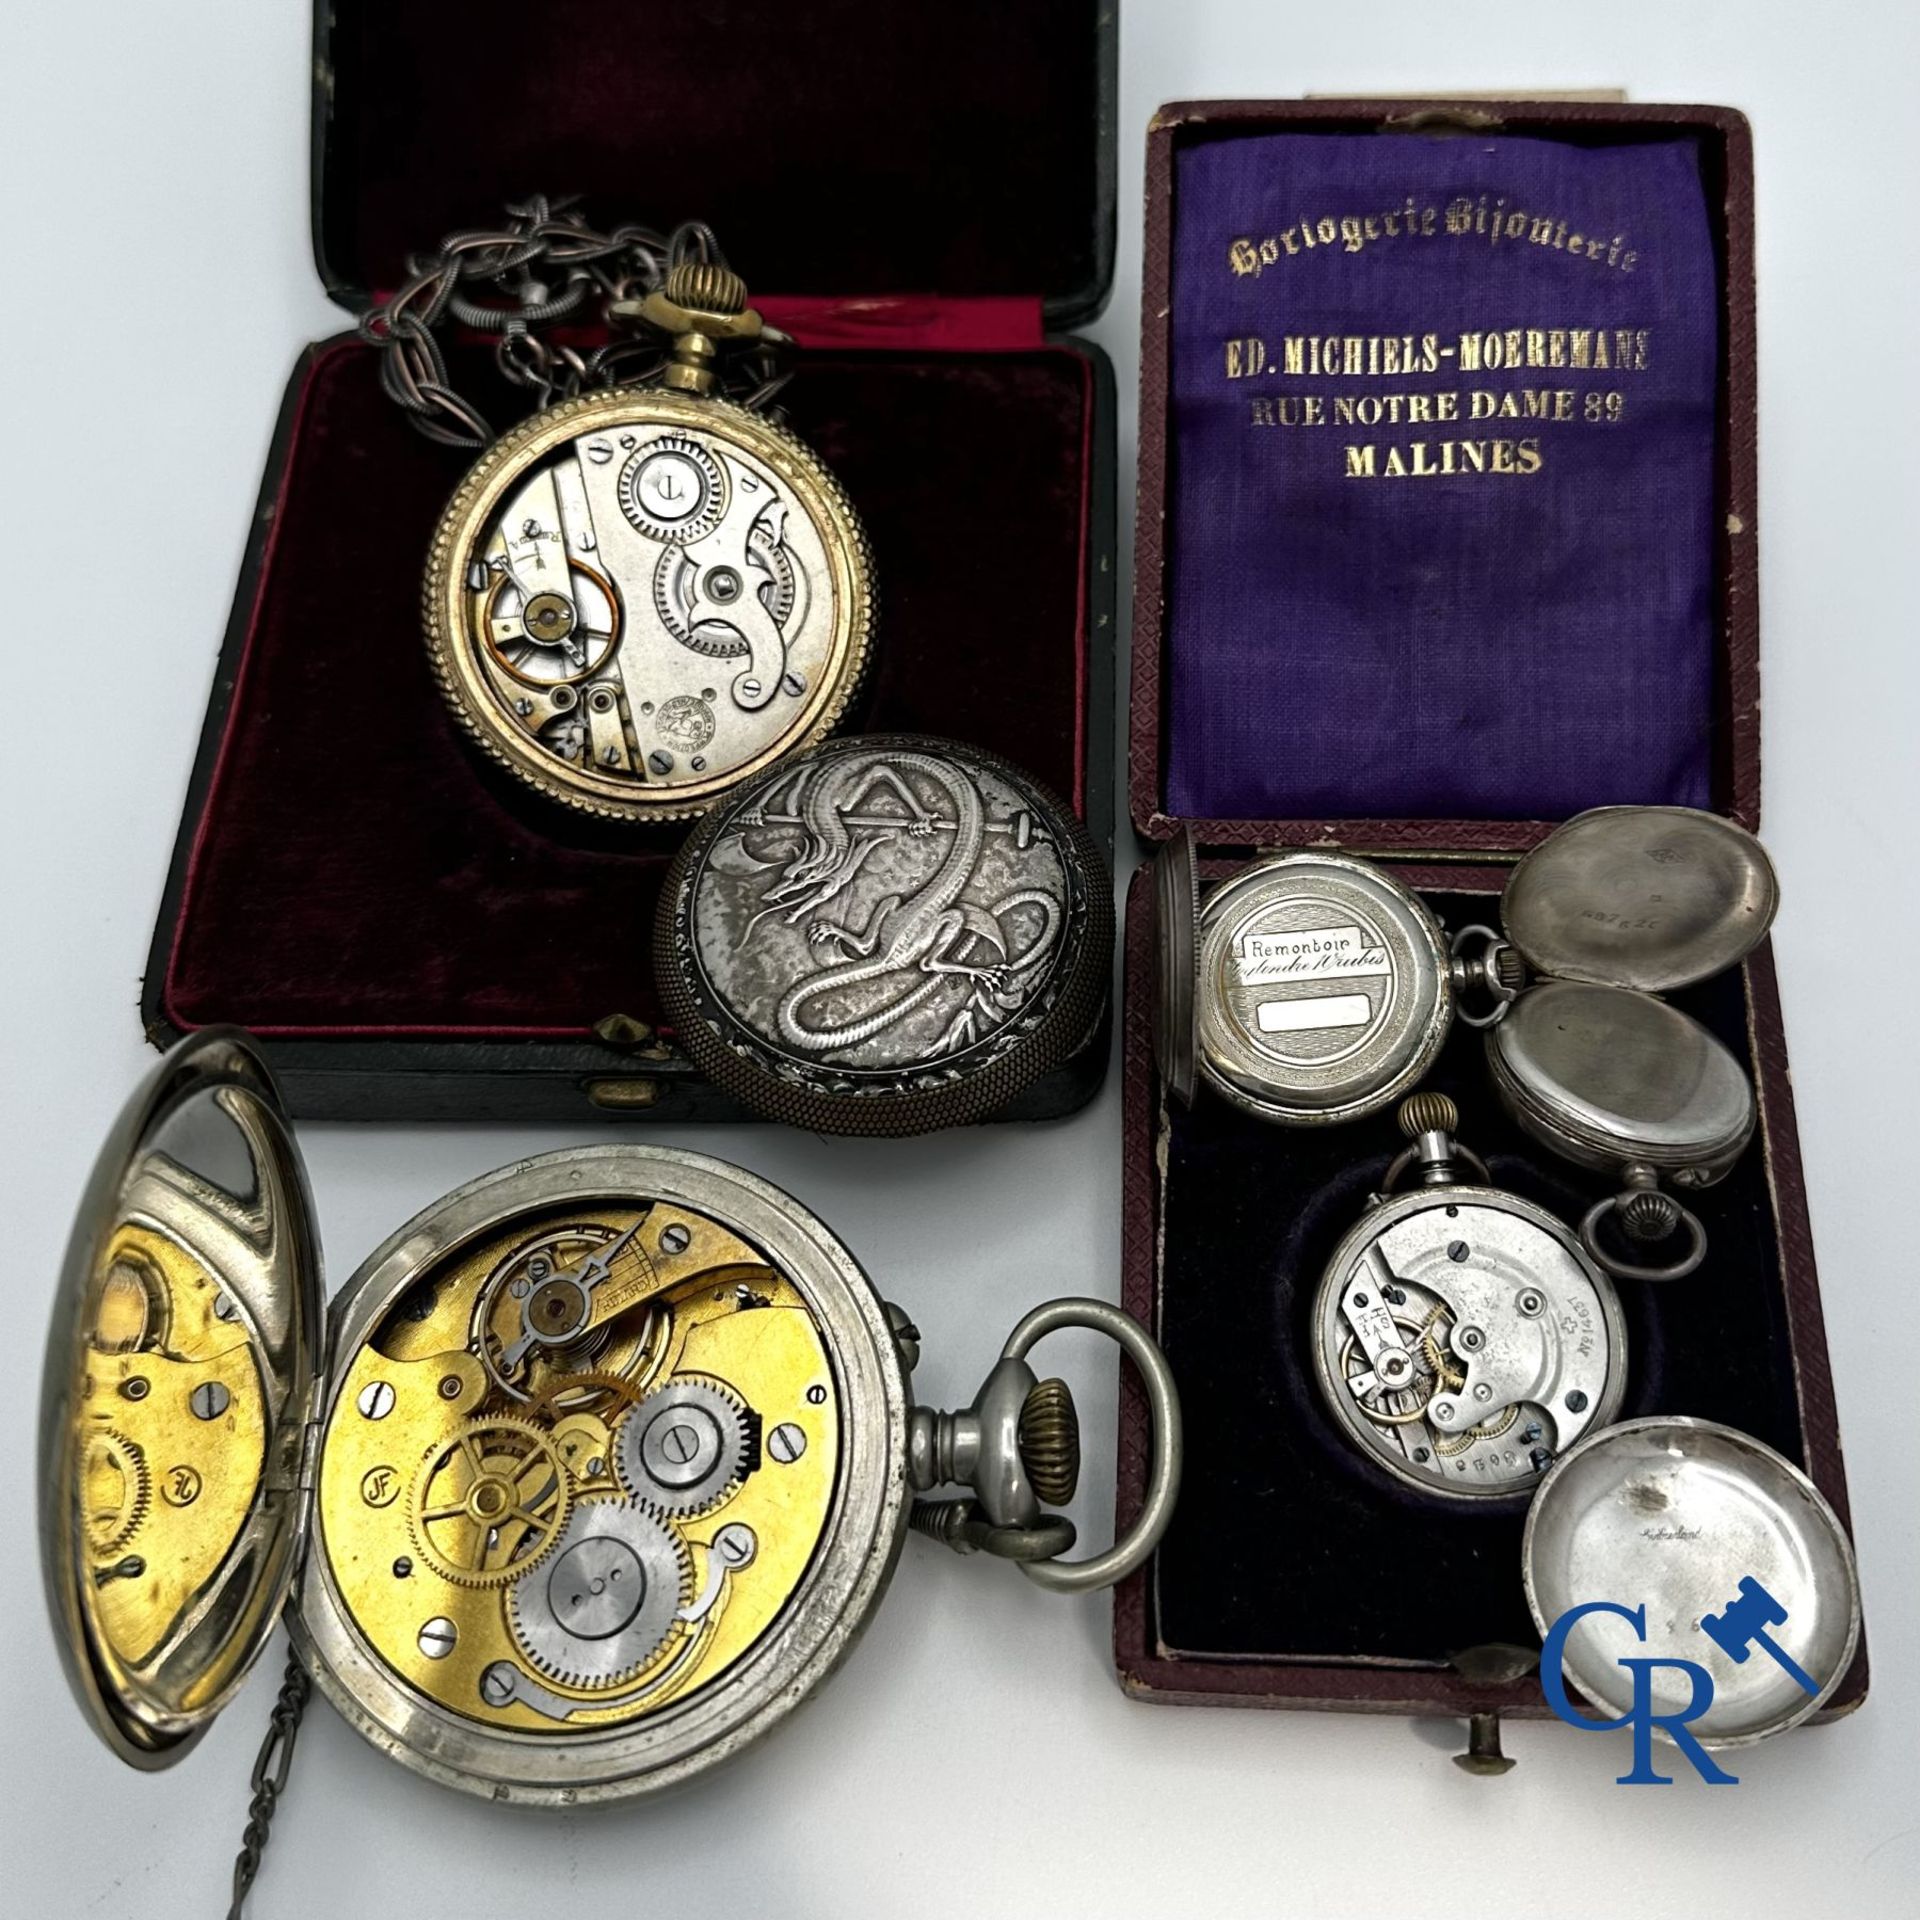 Jewellery-watches: Lot consisting of 2 large men's pocket watches and 3 women's watches. - Image 2 of 2